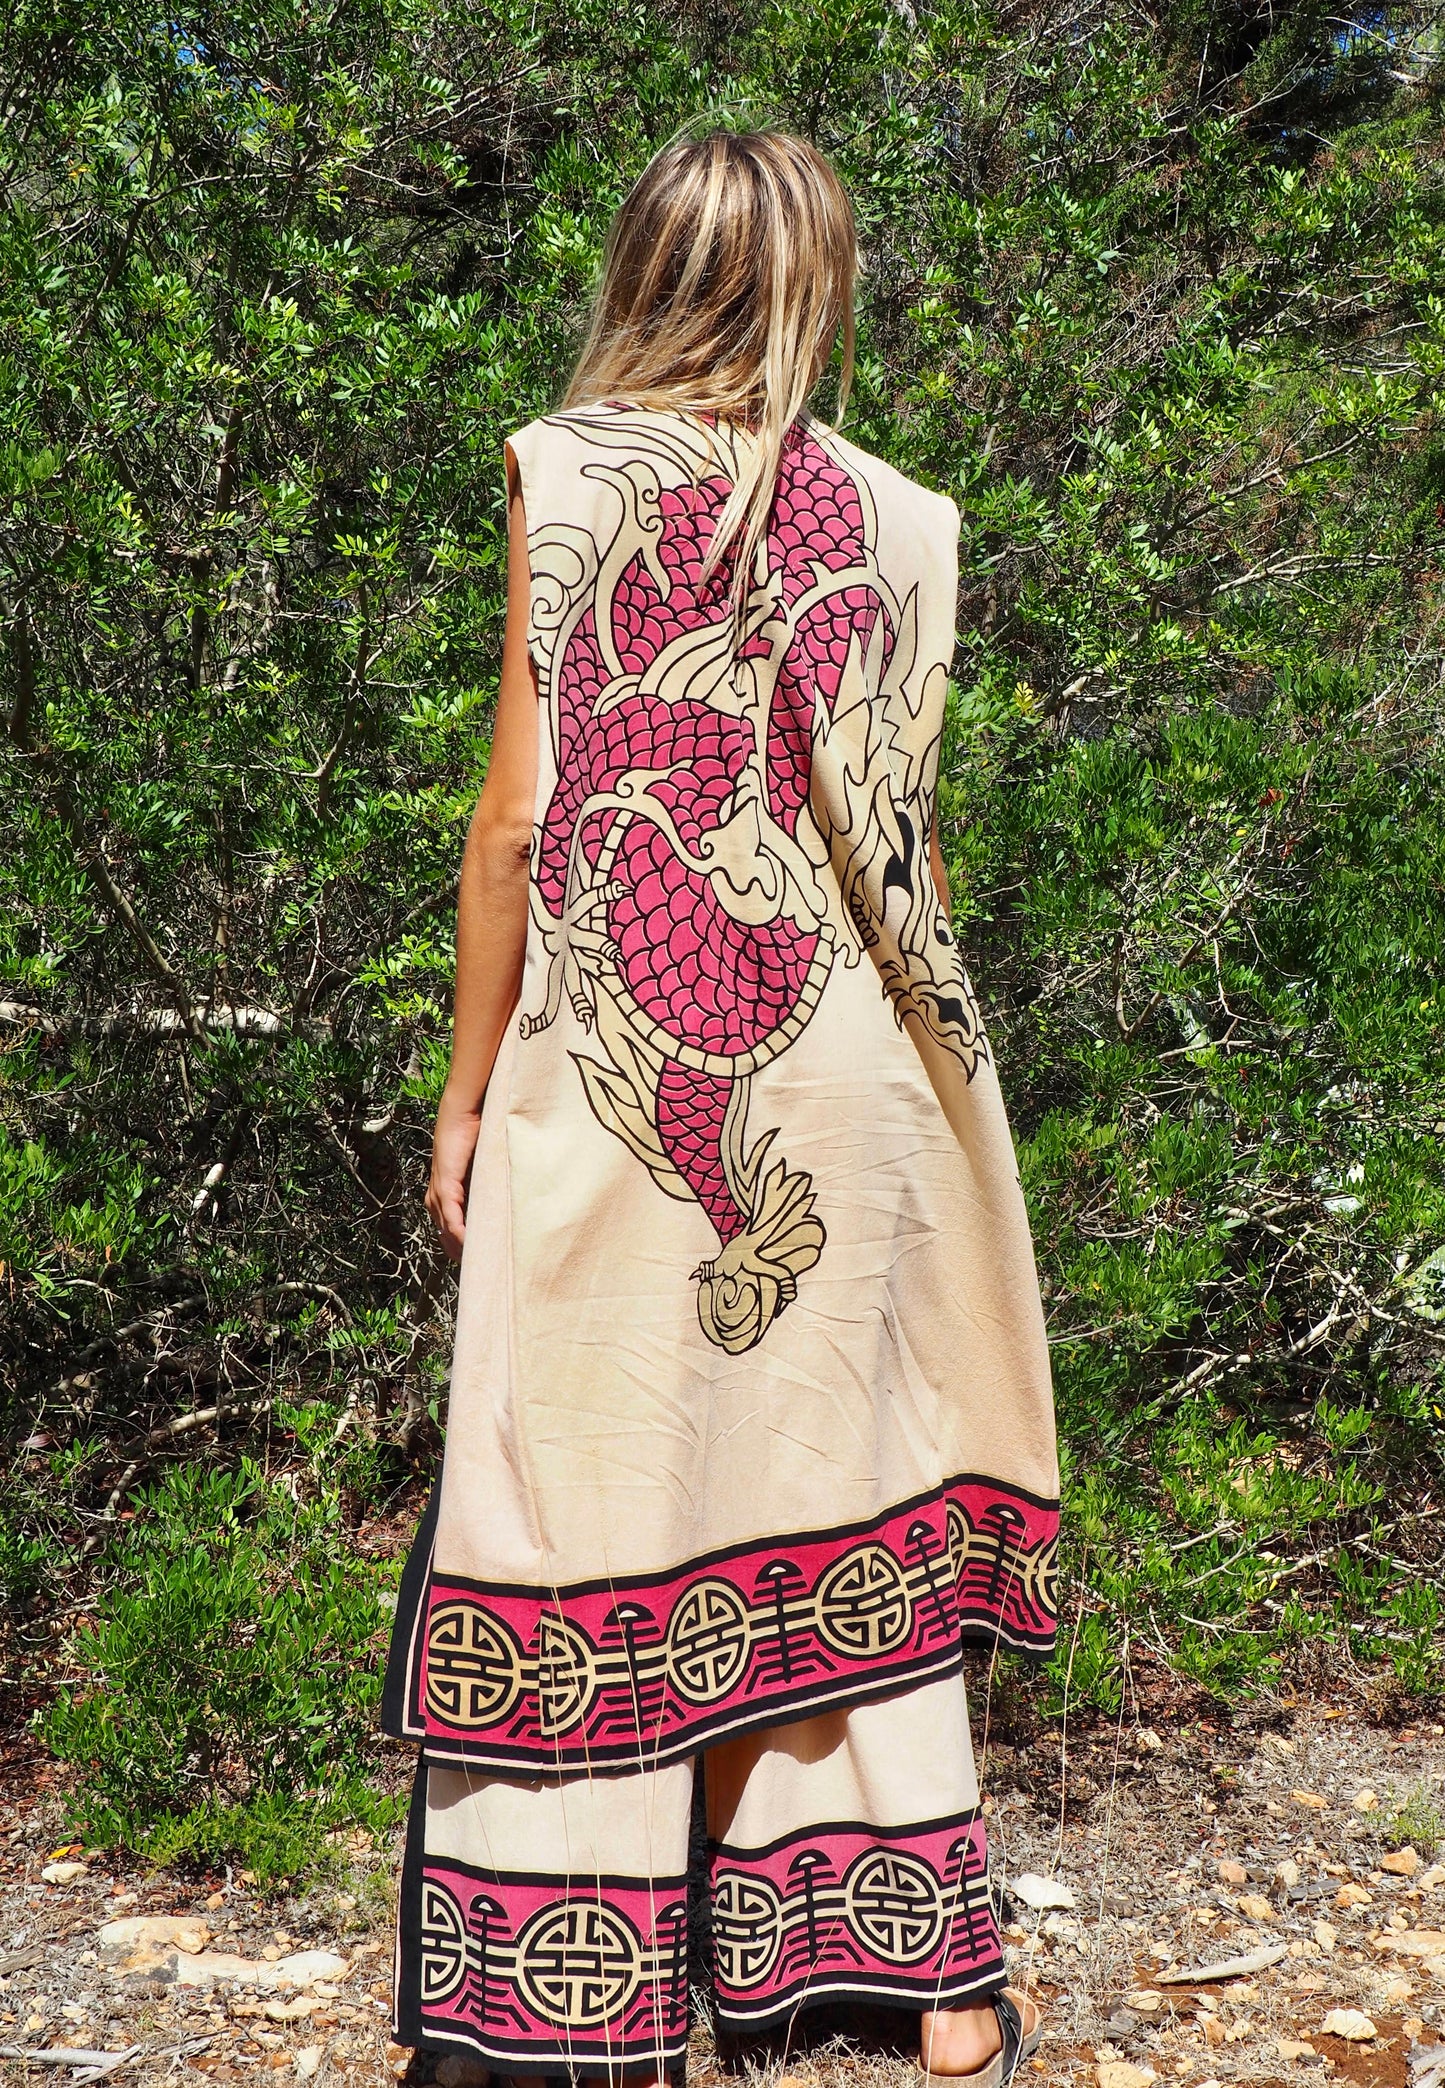 Up-cycled cotton long kimono waistcoat in pink and cream with dragon design and circular motifs by Vagabond Ibiza